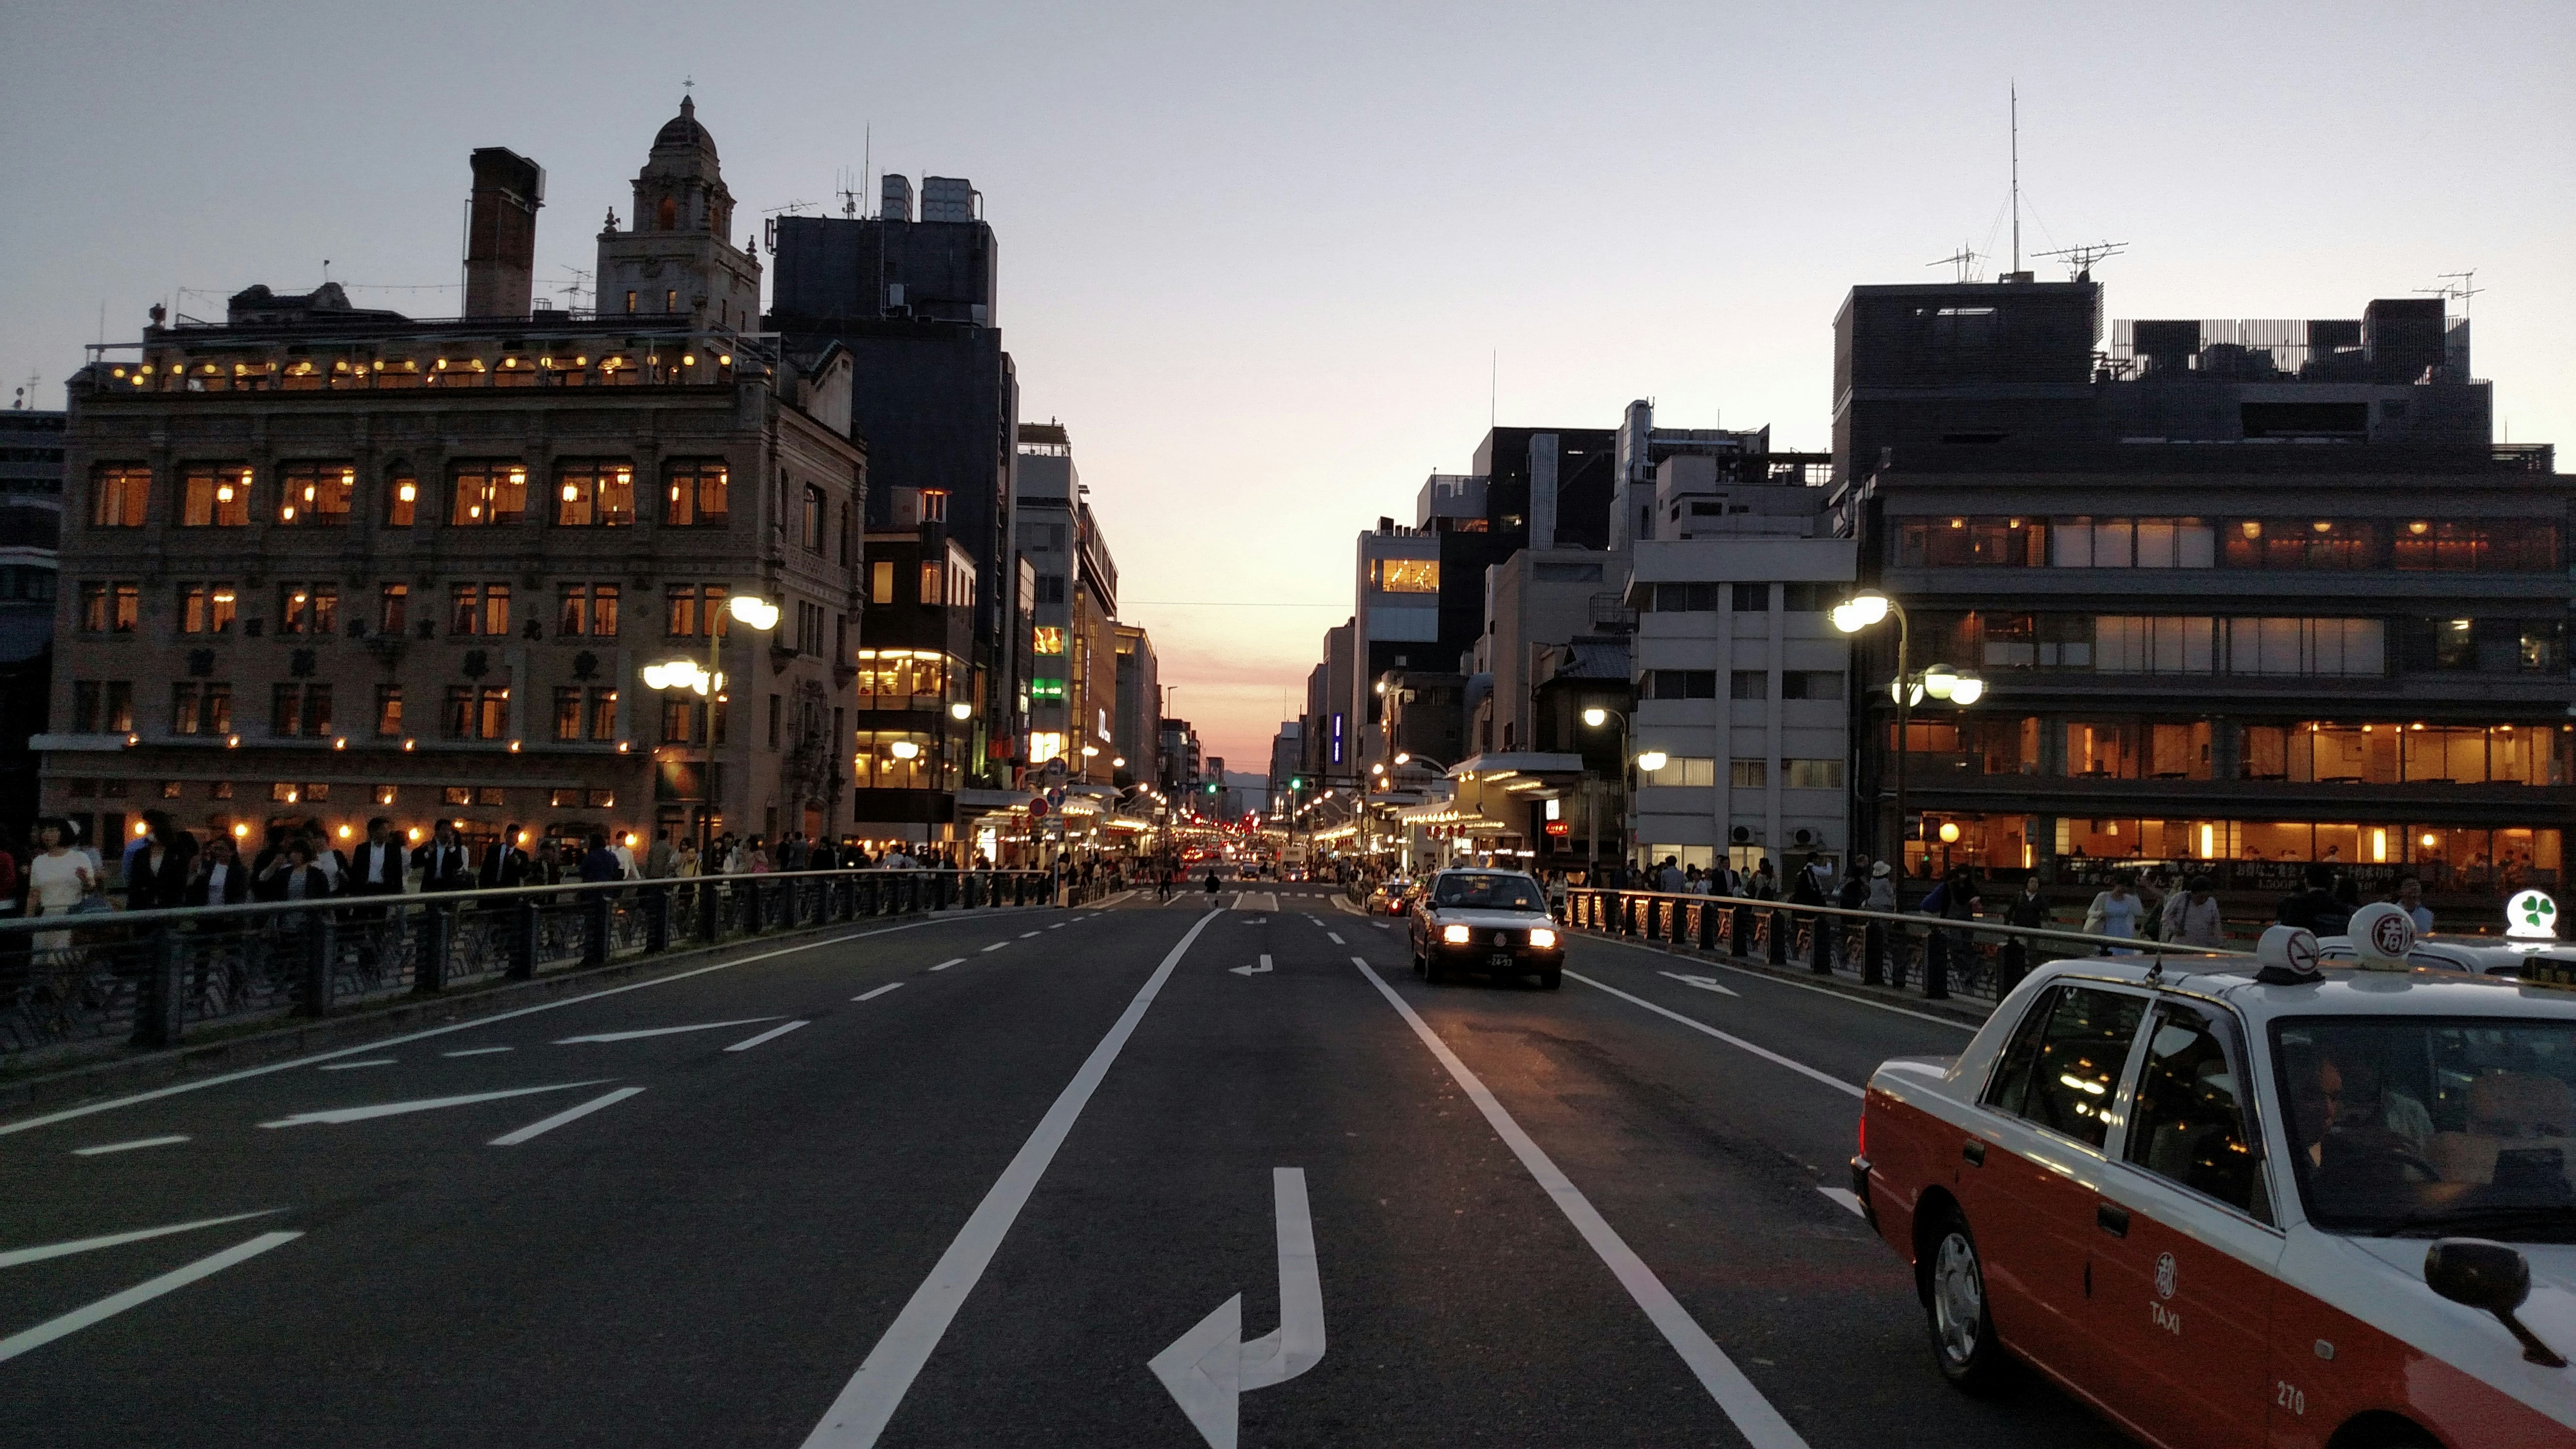 Kyoto street in the evening